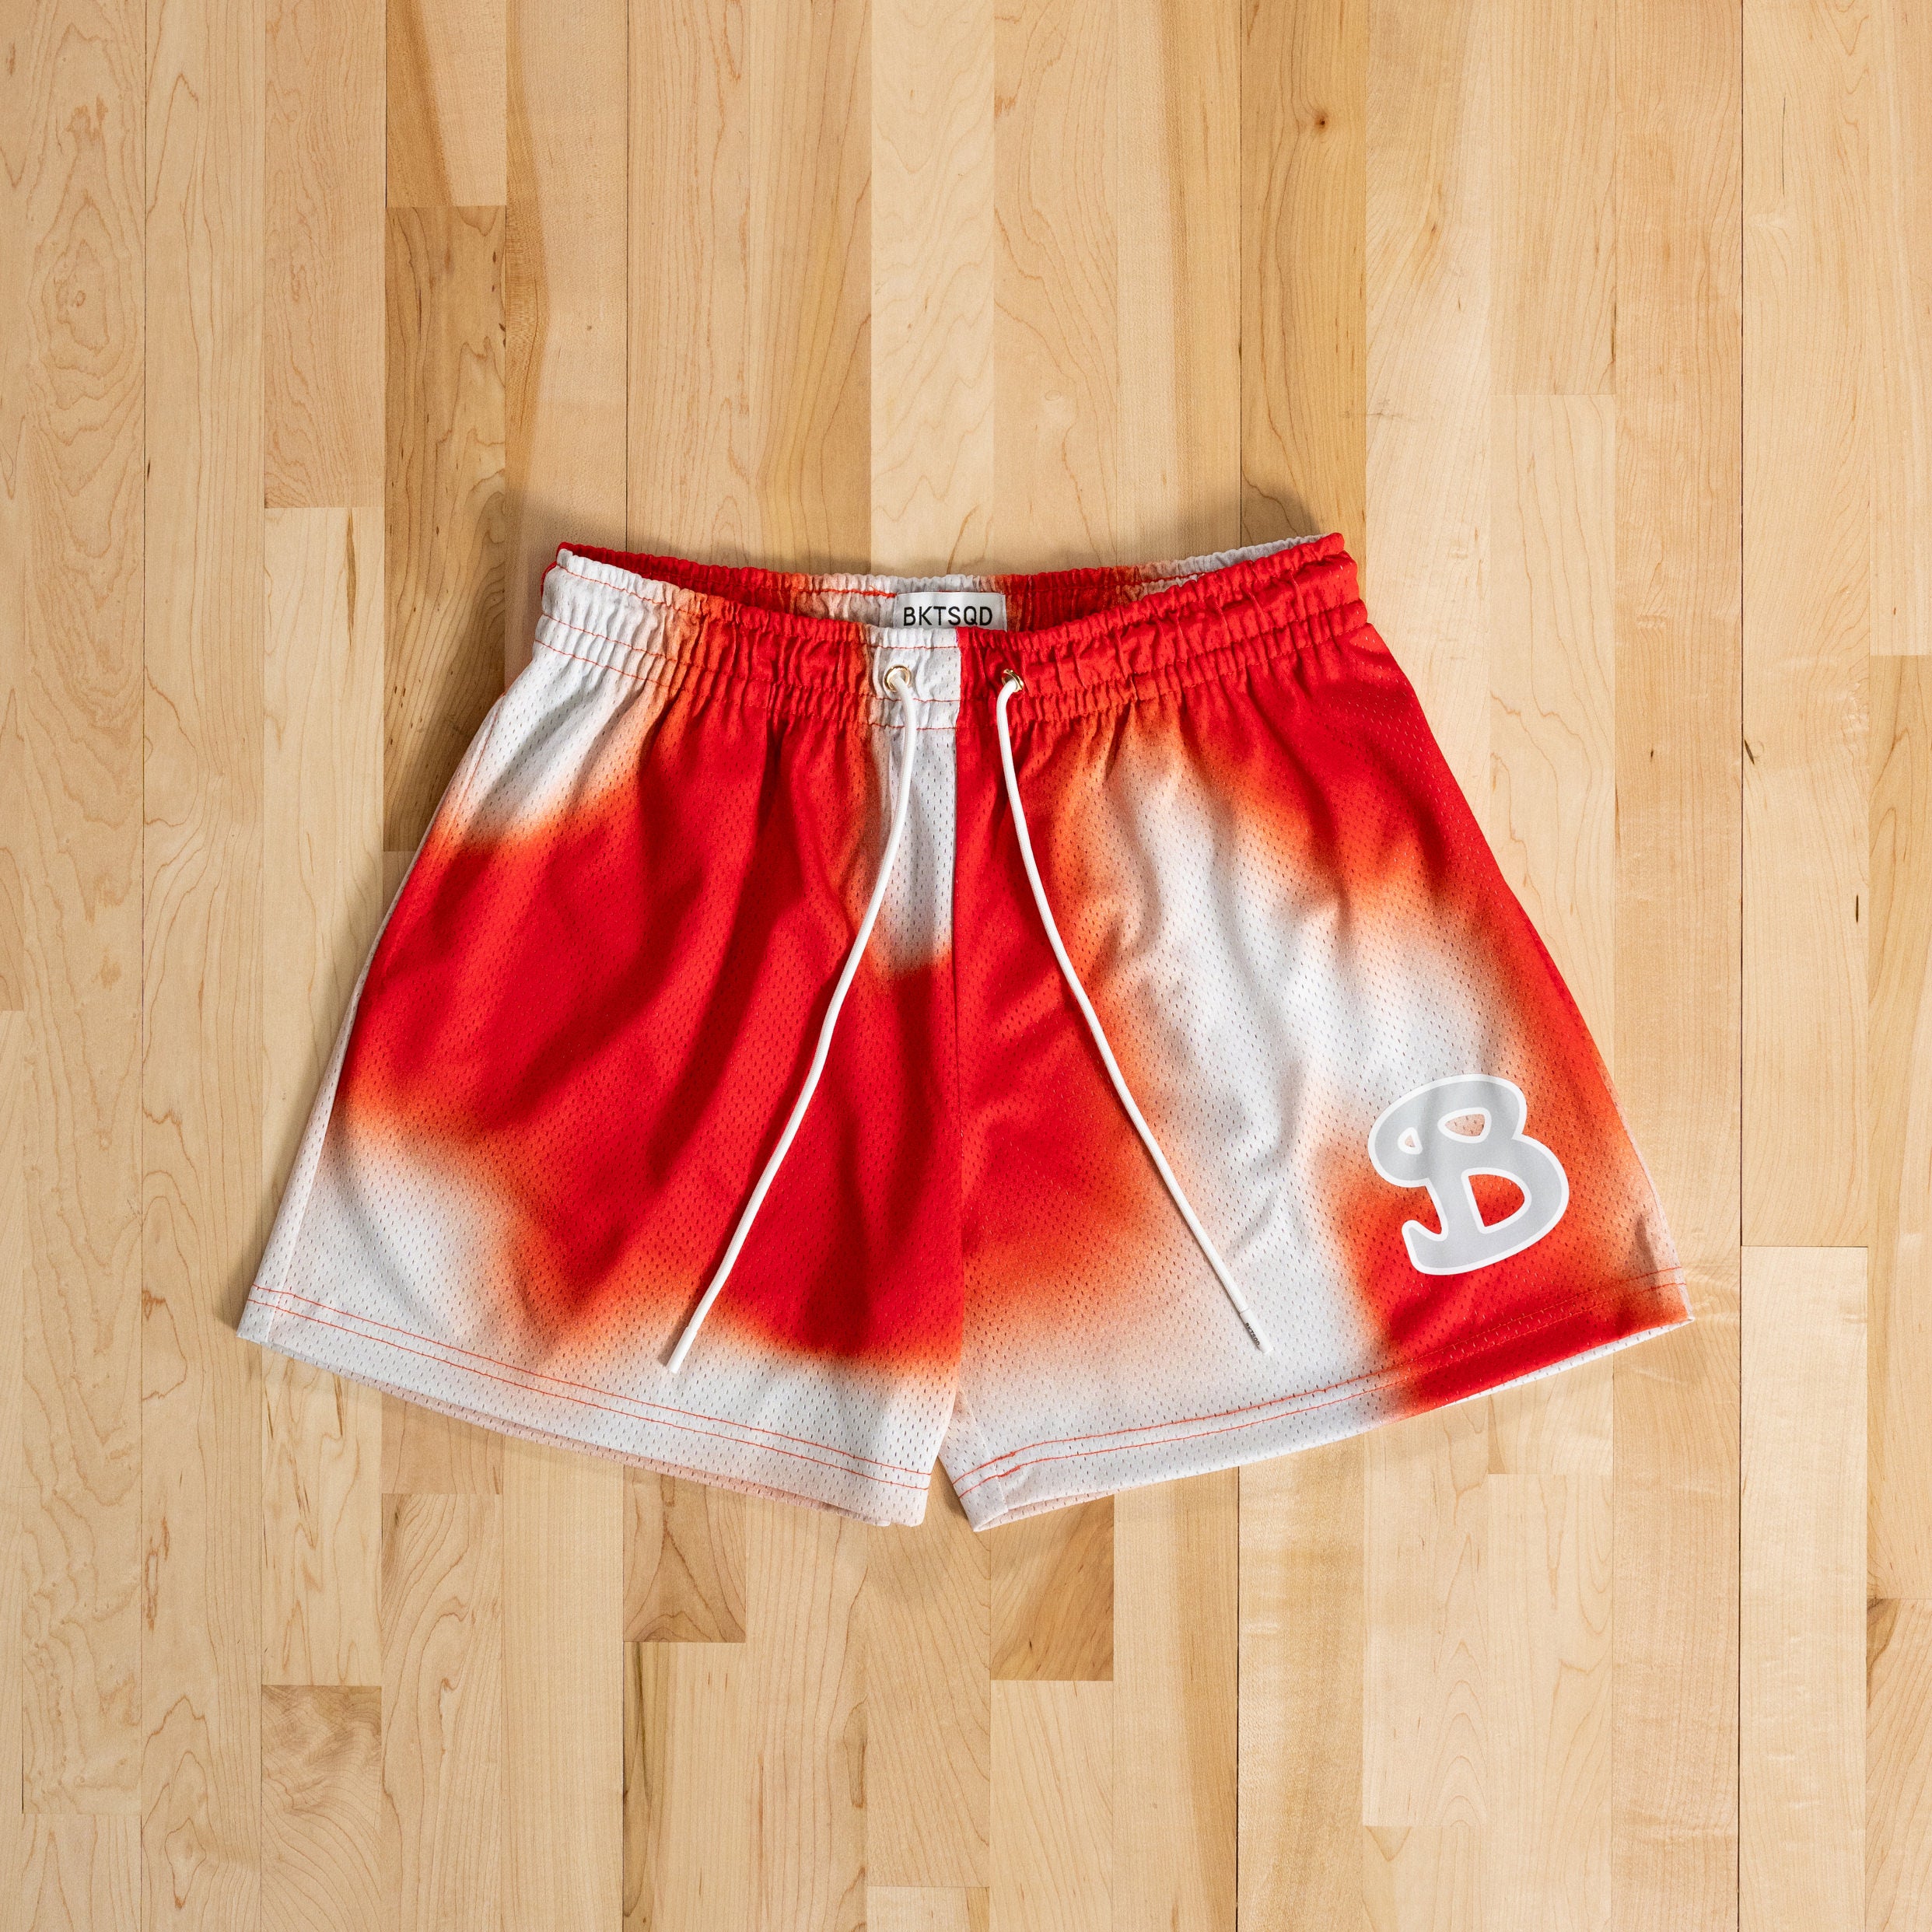 MARCH SLAM ADULT SHORTS - RED, WHITE